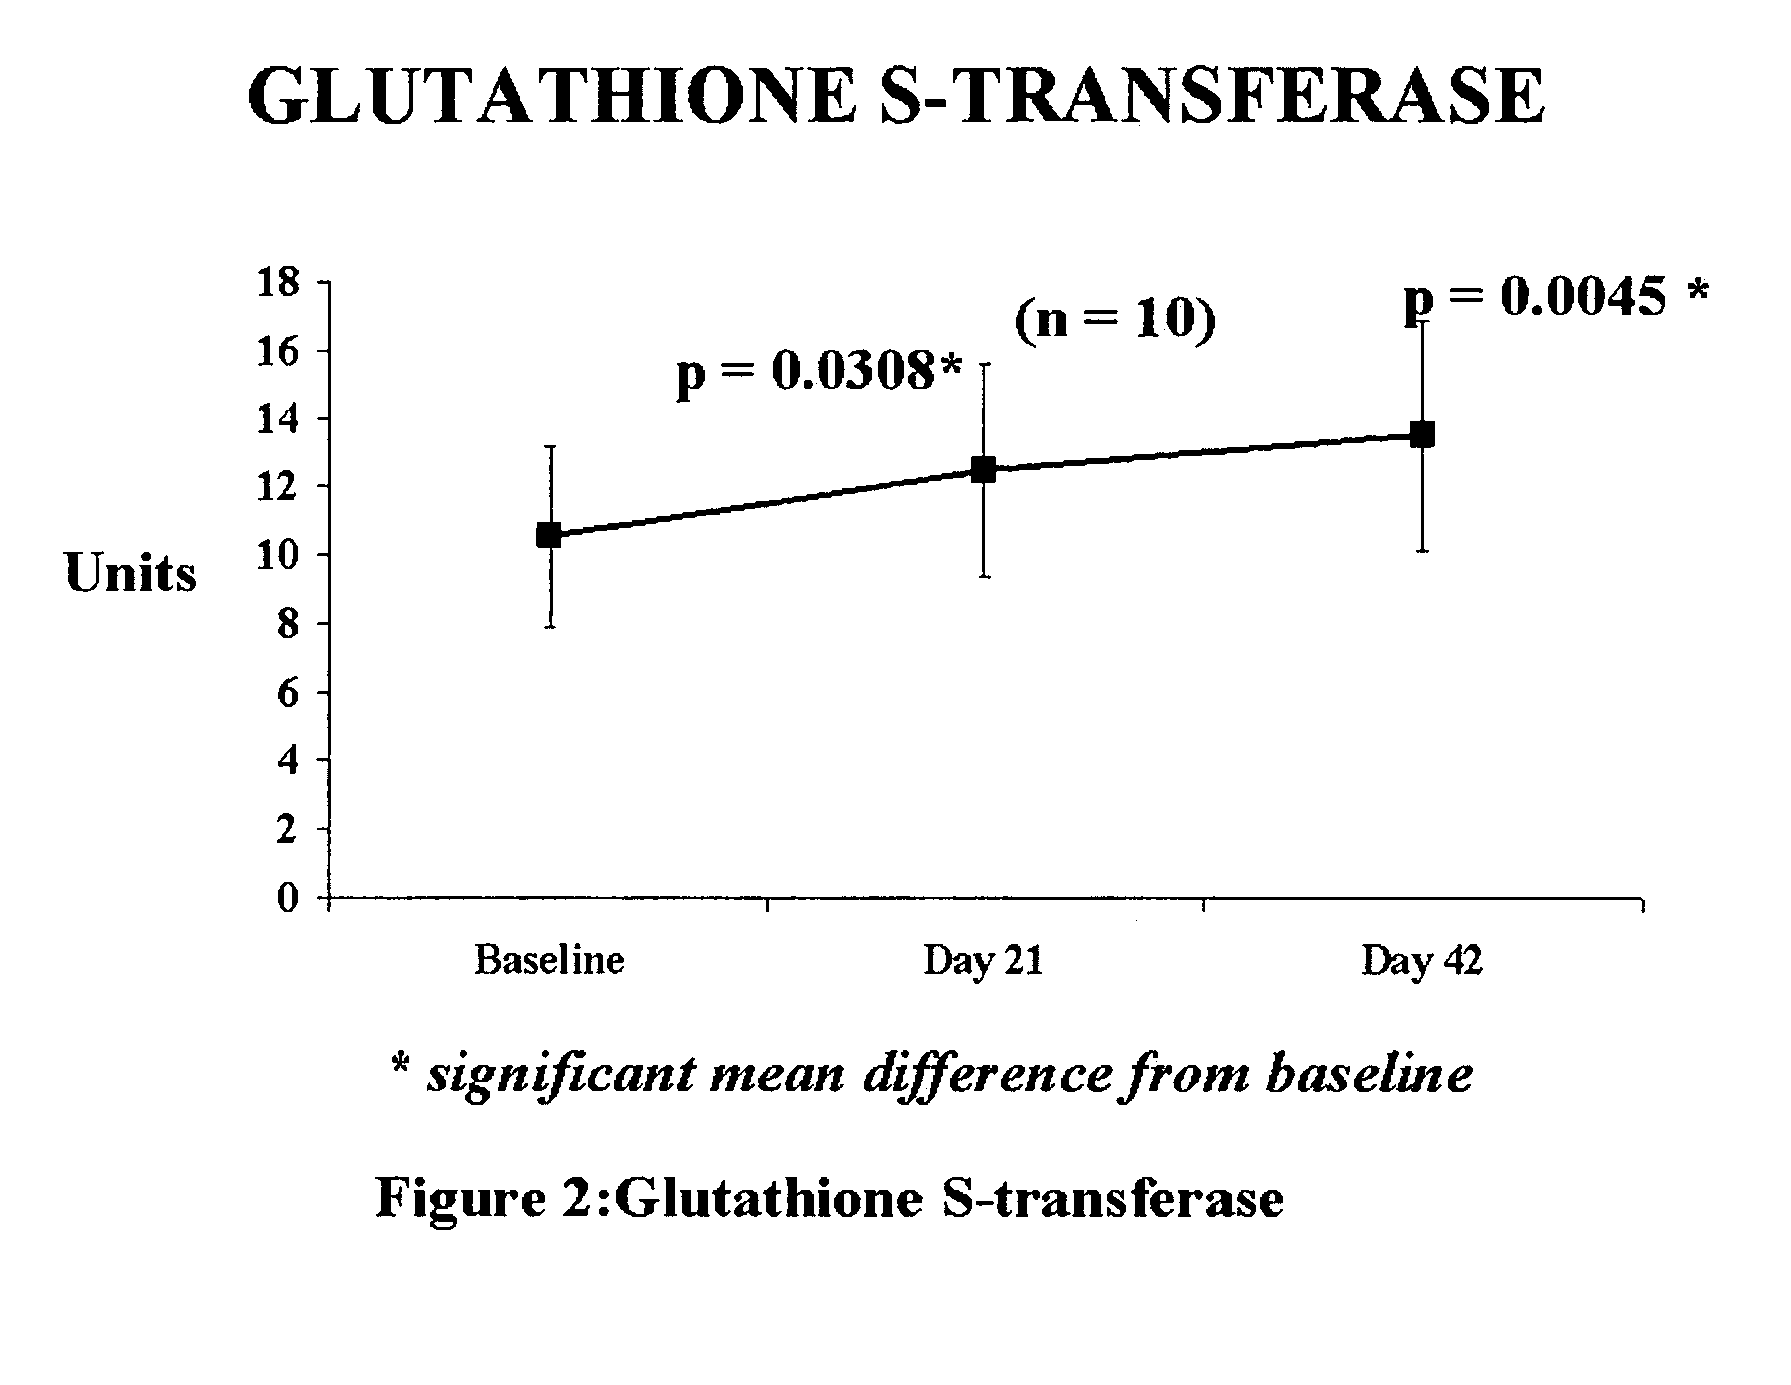 Compositions and methods containing bioavailable Se-methyl-L-selenocysteine for human and veterinary use